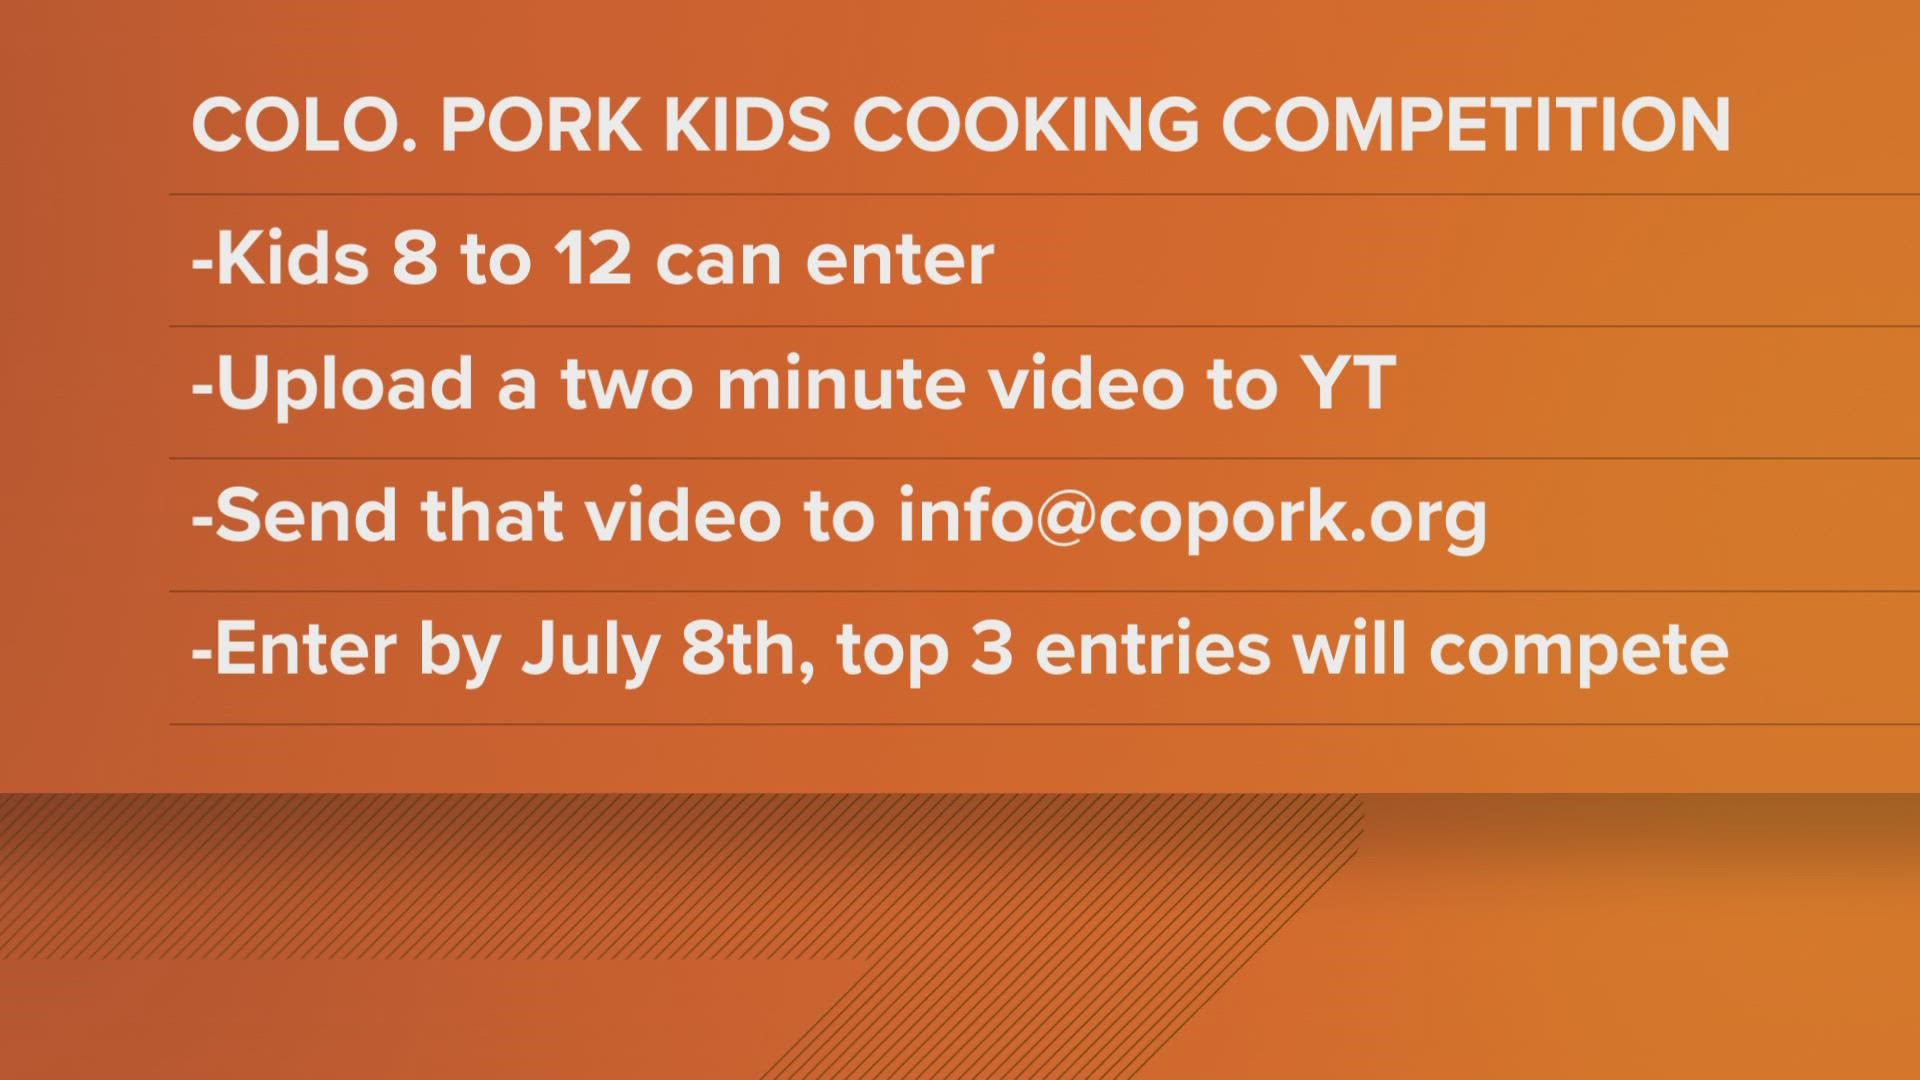 There is one week left to enter the Colorado Pork summer kids cooking competition.